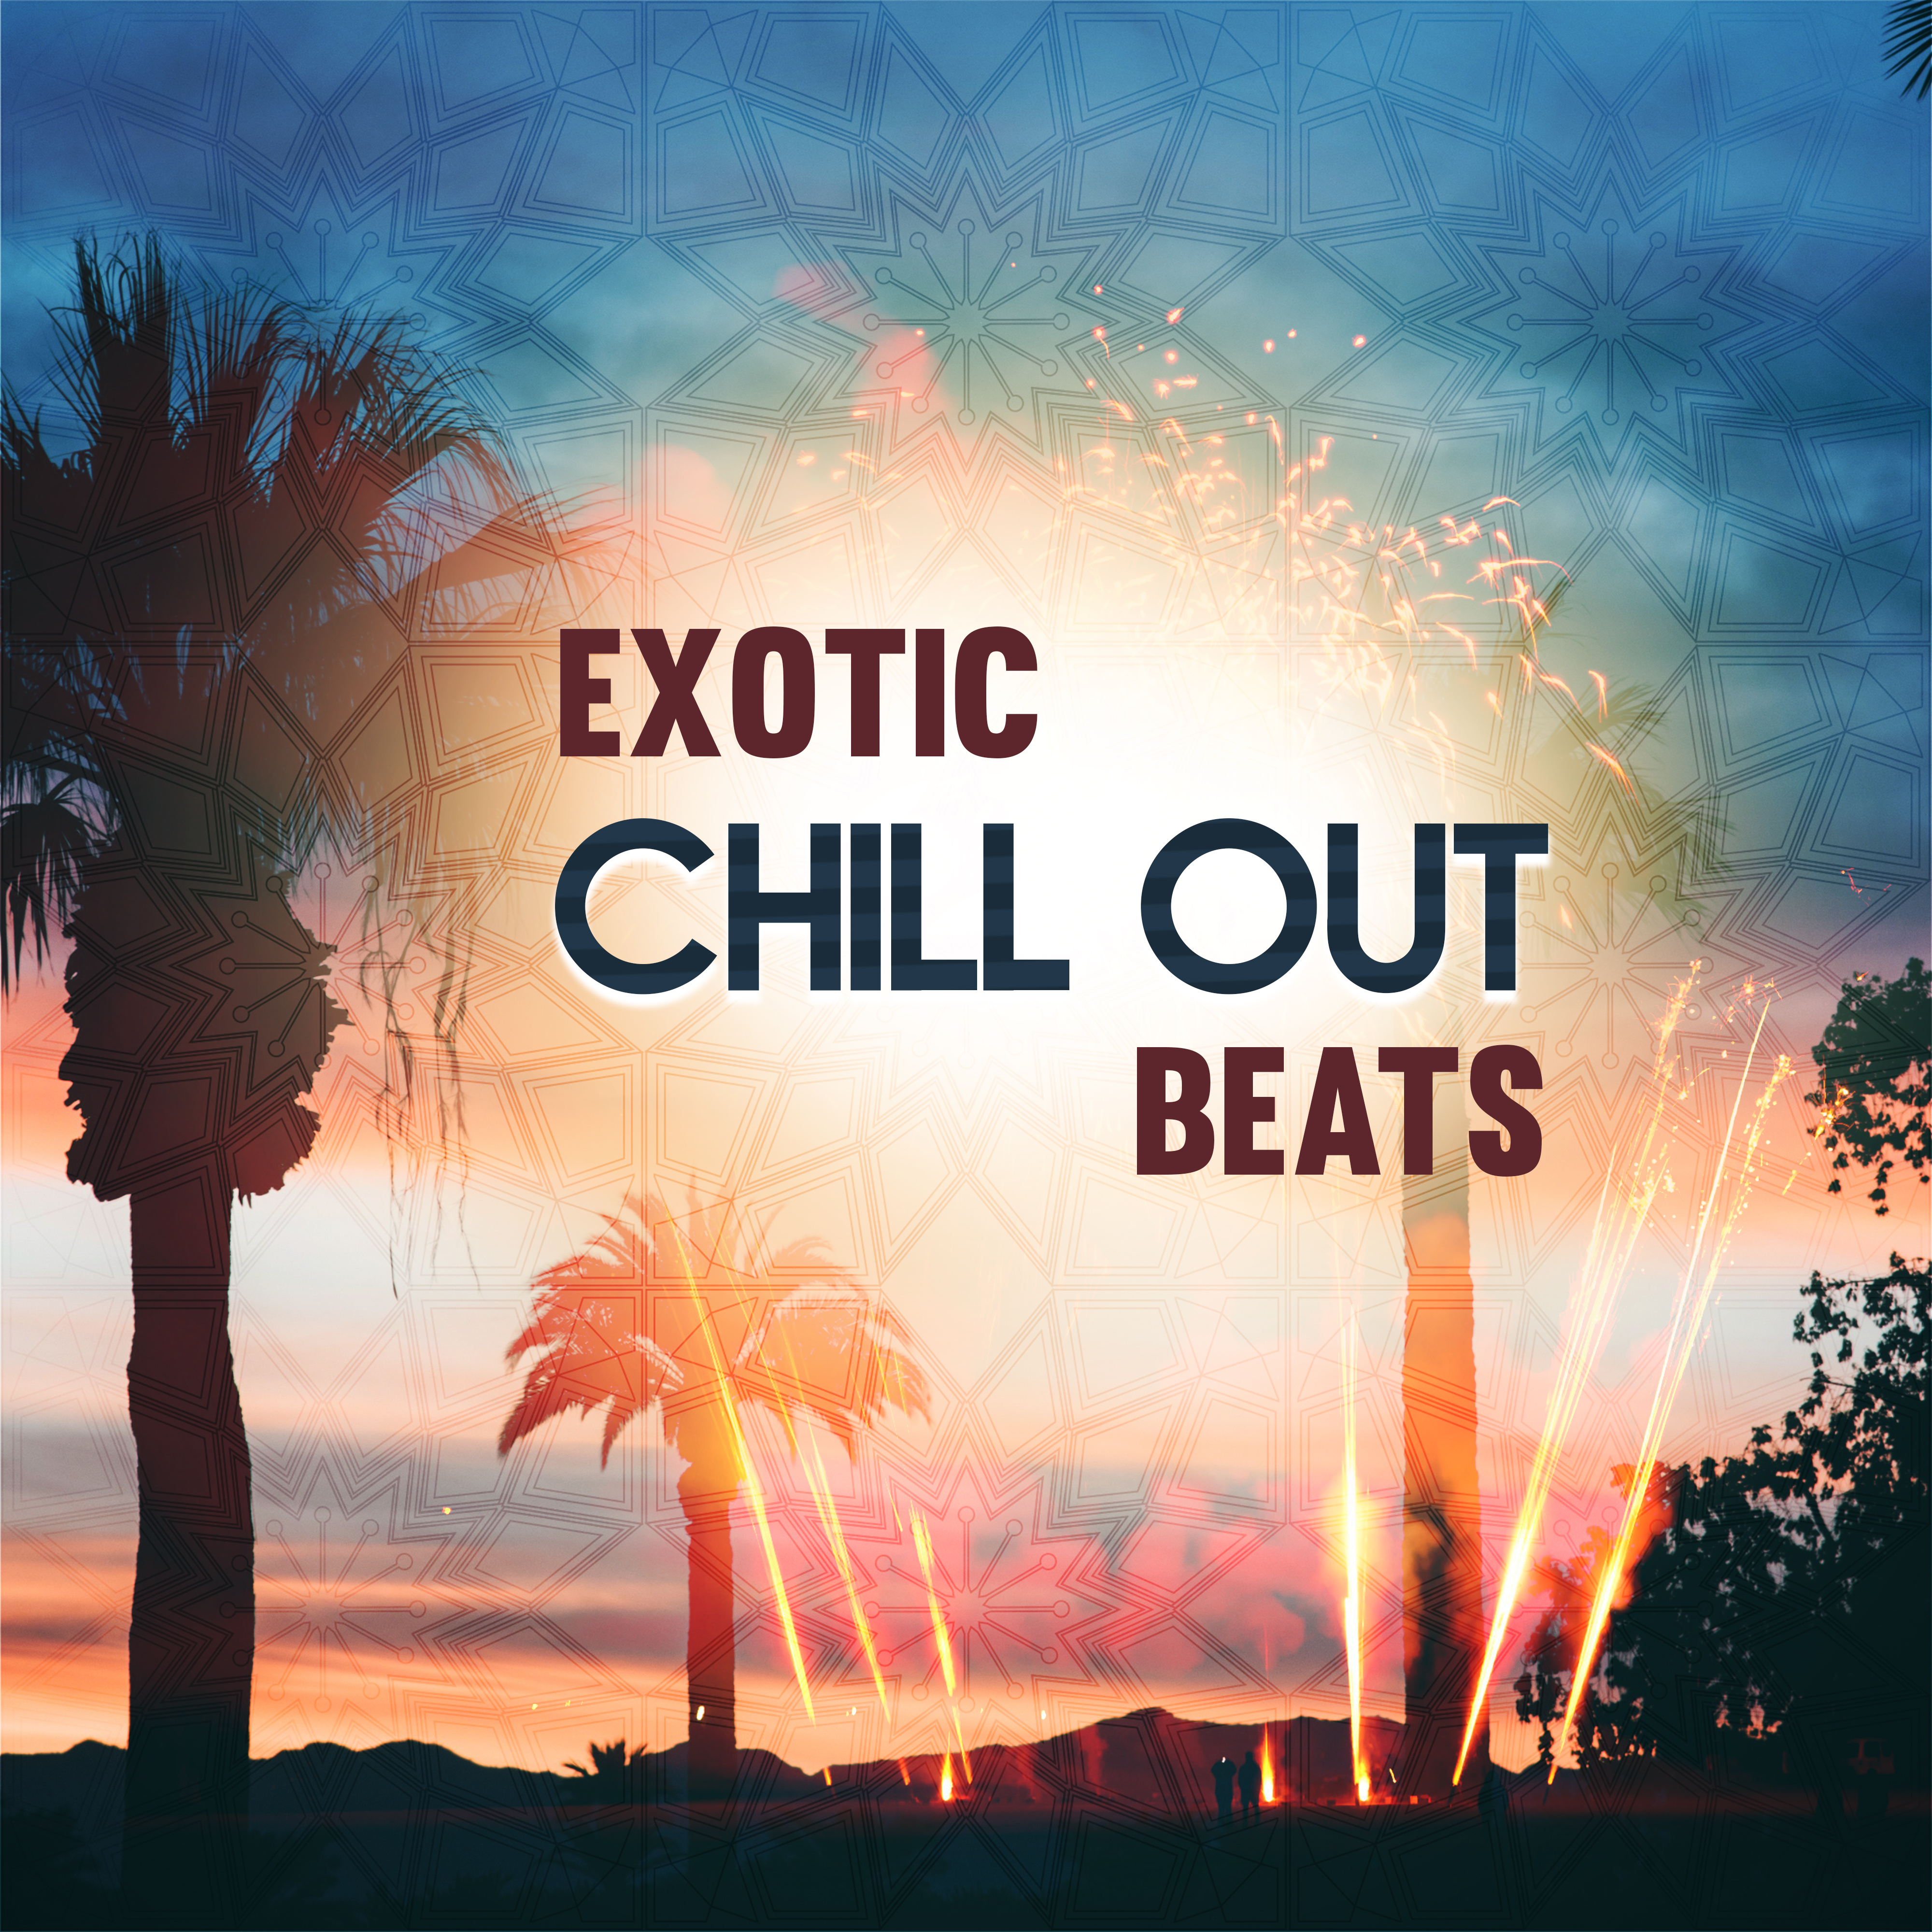 Exotic Chill Out Beats  Tropical Melodies to Calm Down, Holiday Relaxation, Sunny Chill Out Music